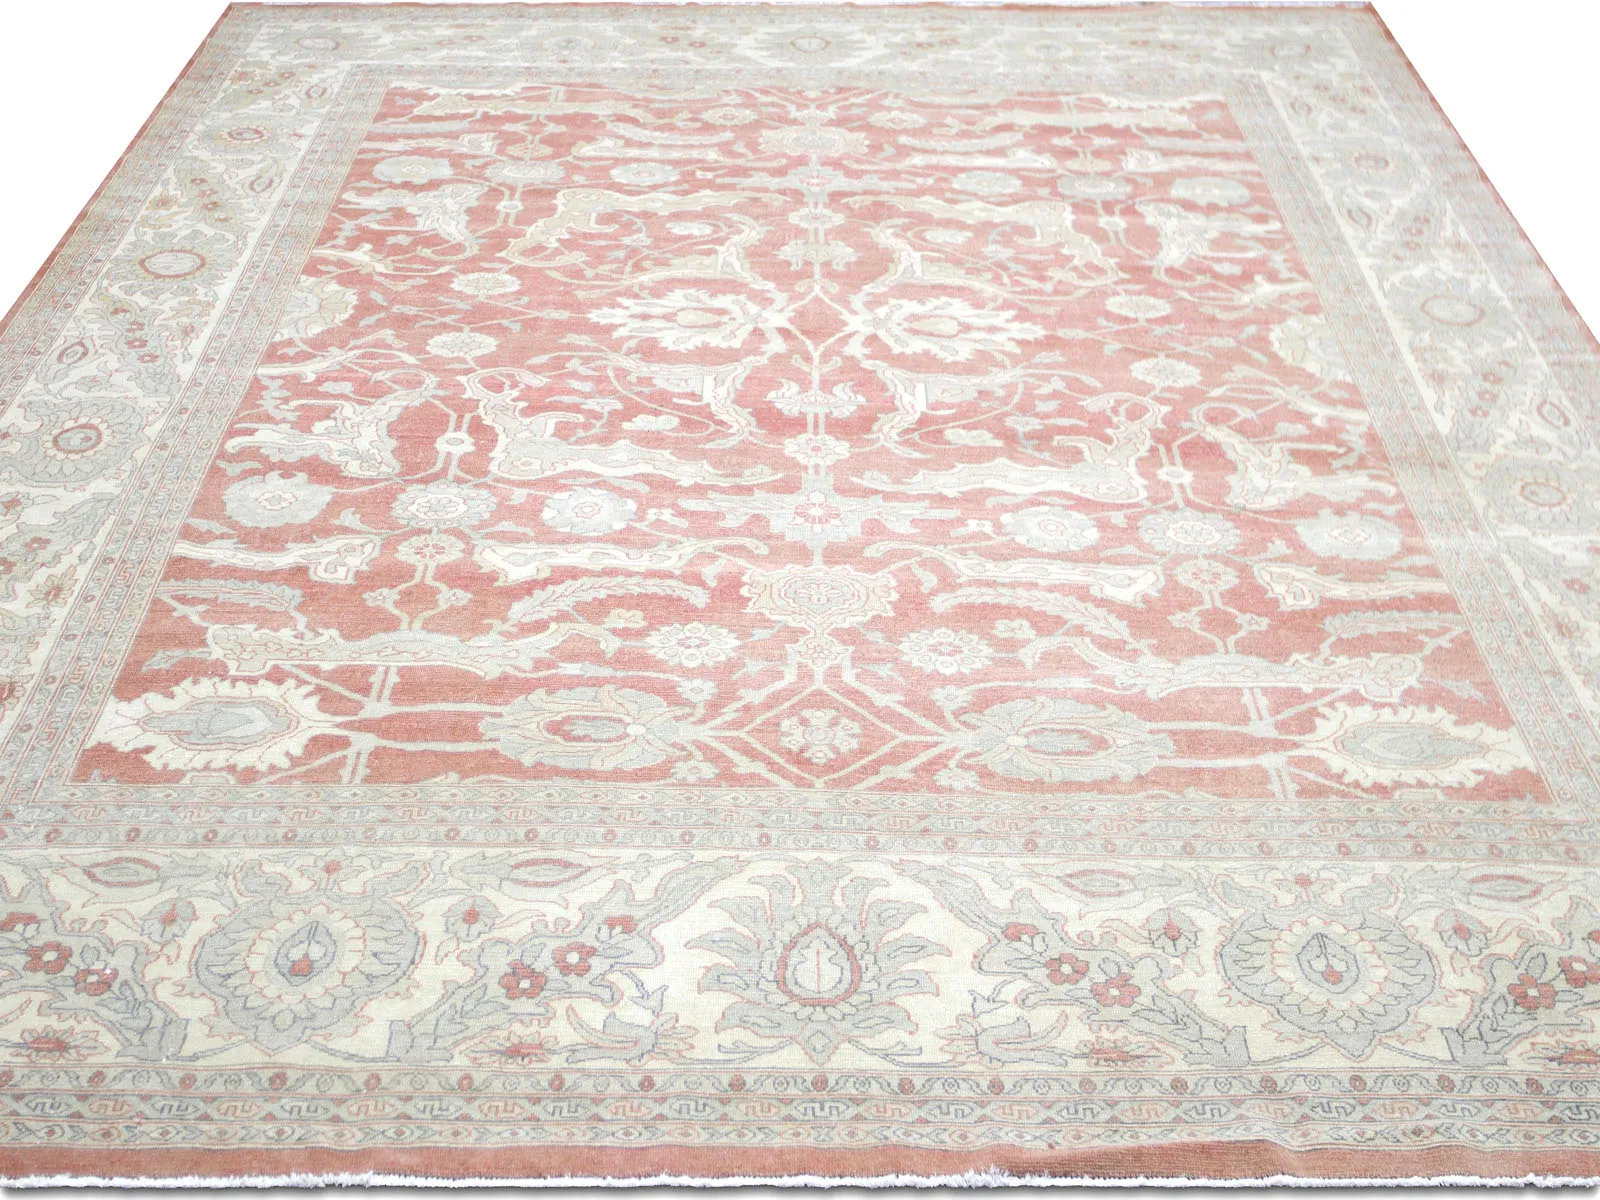 2000 Egyptian Sultanabad Rug-12'4"x15'7" - Red - Red